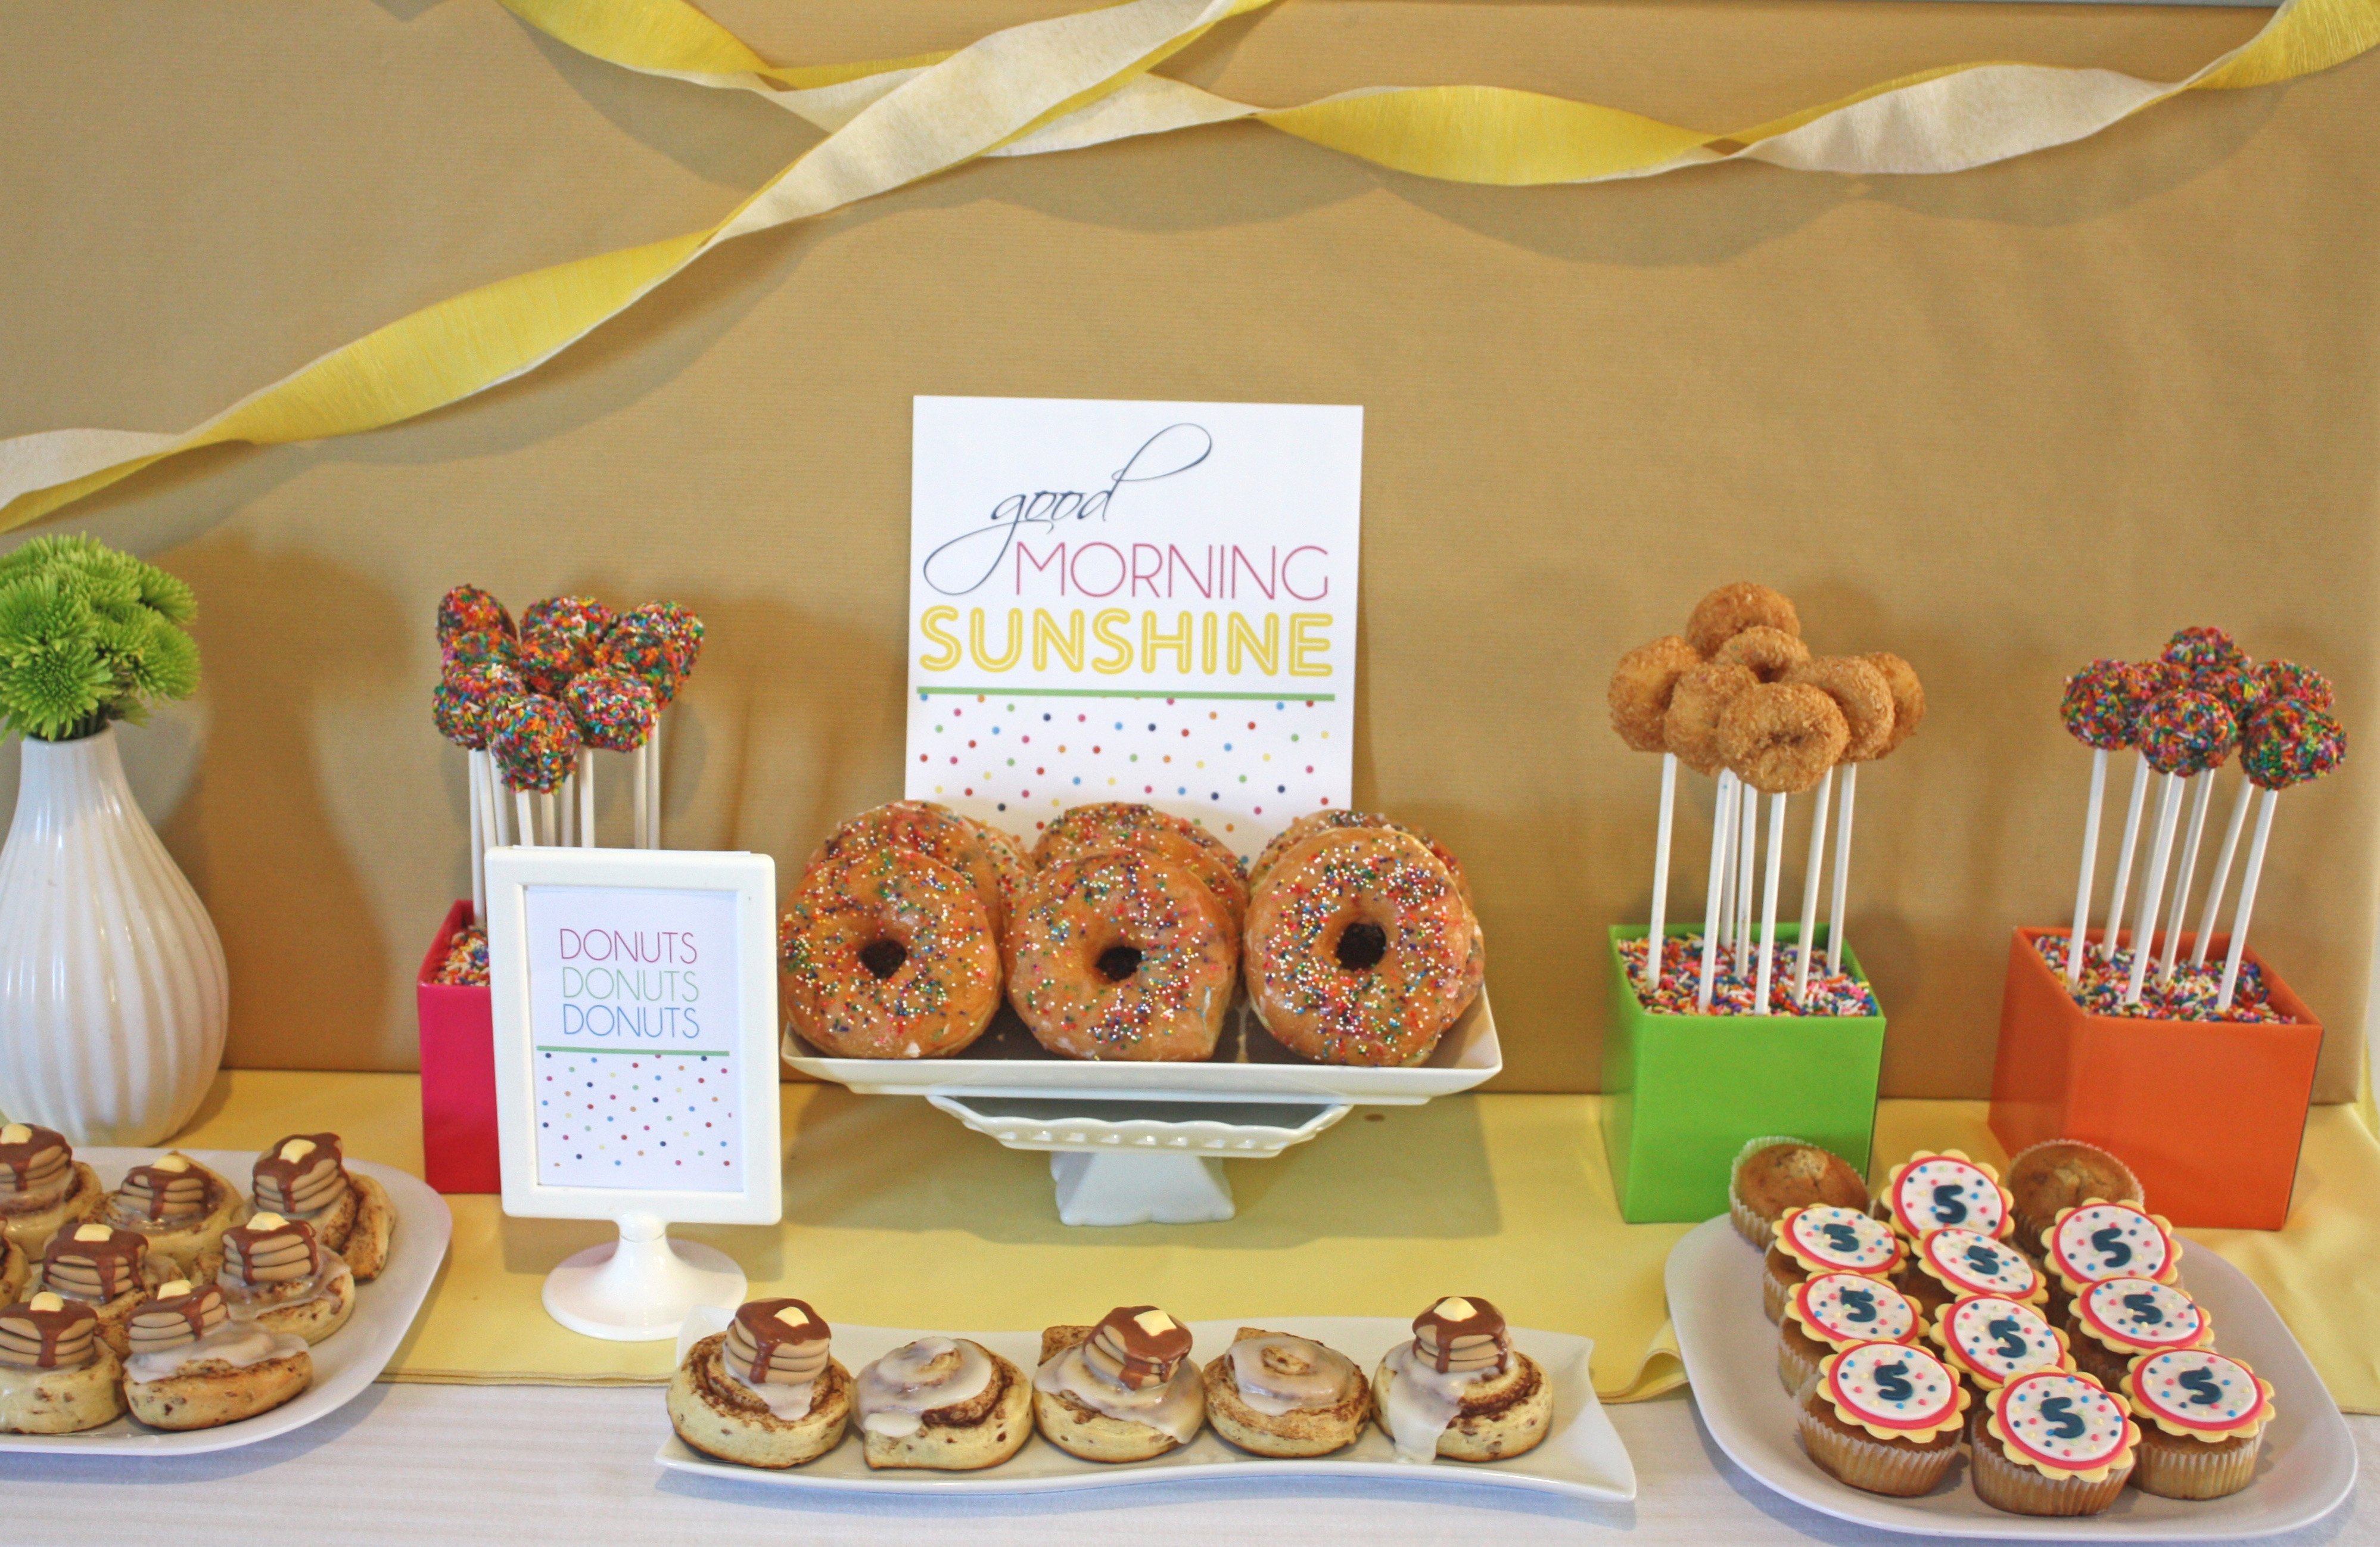 10 Elegant Brunch Ideas For A Party birthday breakfast party wear your pajamas thoughtfully simple 1 2022